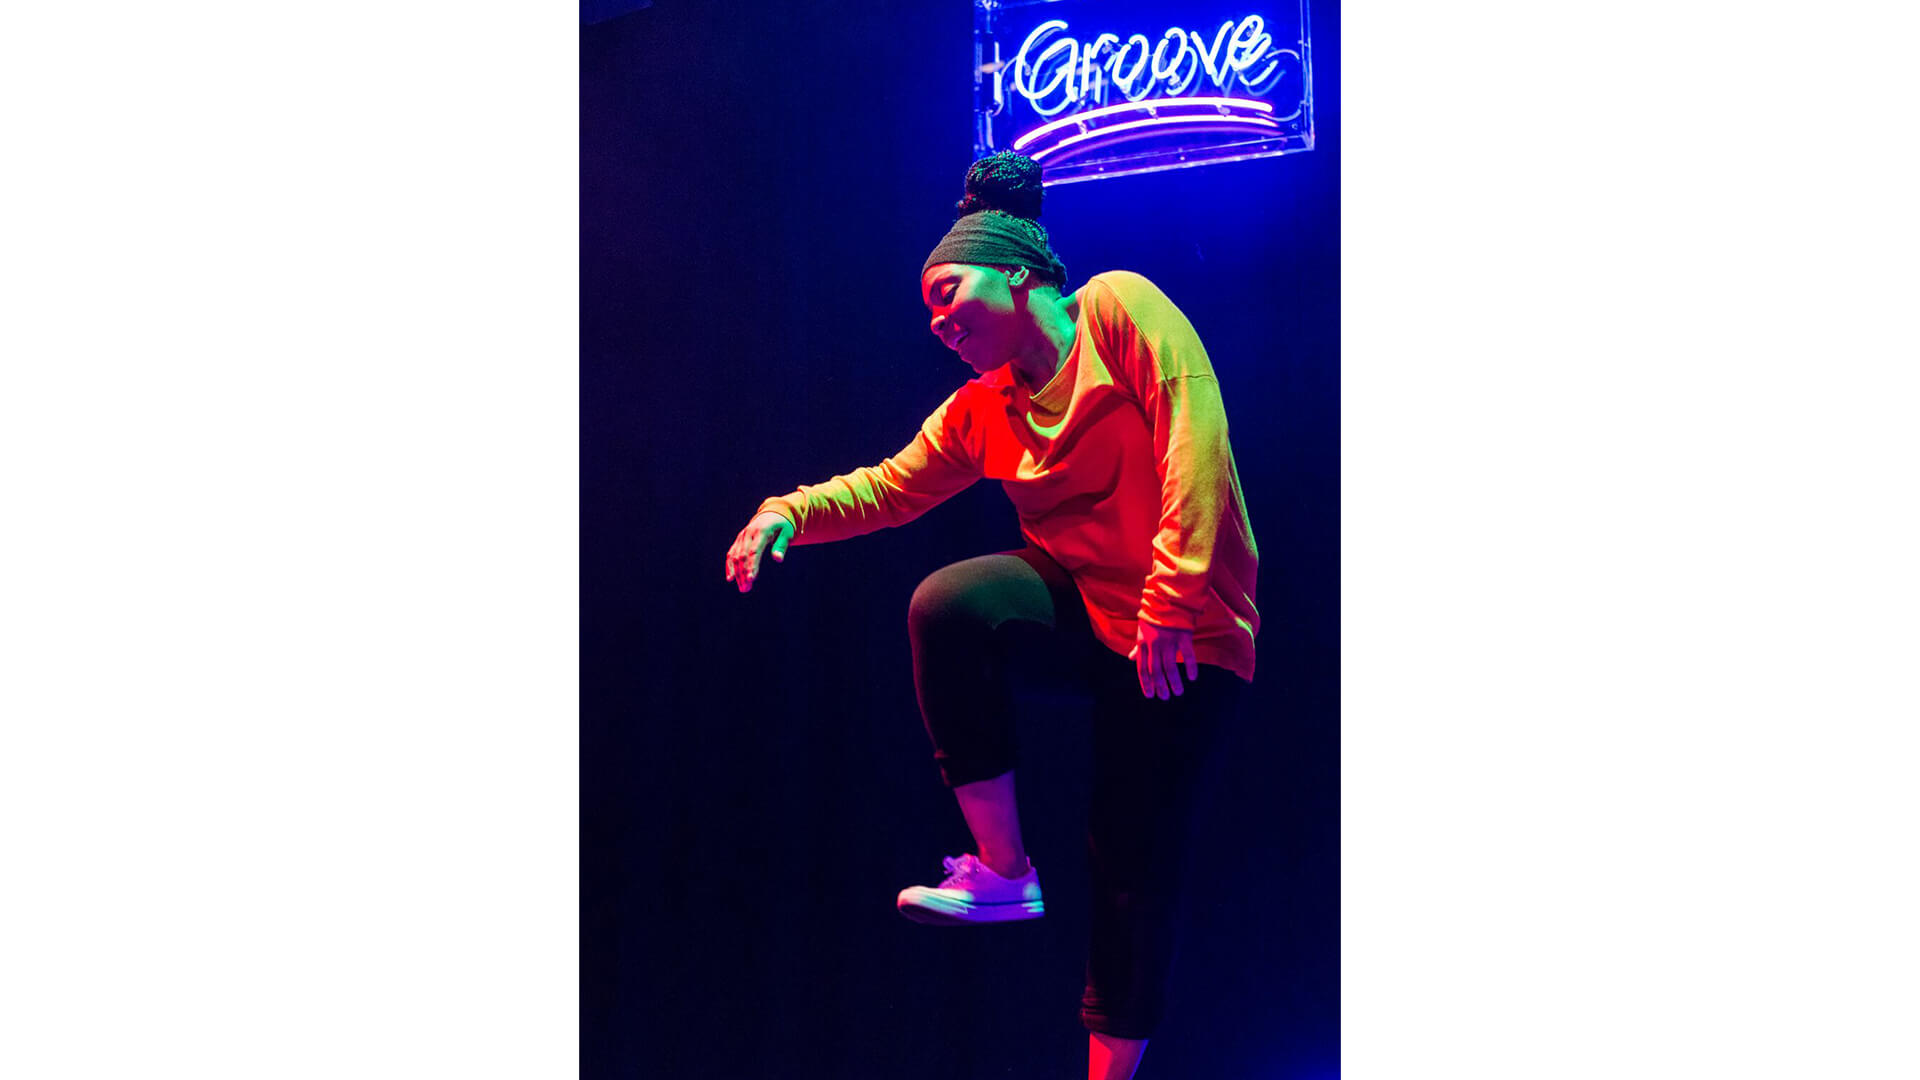 A black woman wearing an orange top and grey leggings moves rhythmically on the dancefloor. Above her is a neon sign that hangs from the ceiling that reads: “Groove”.